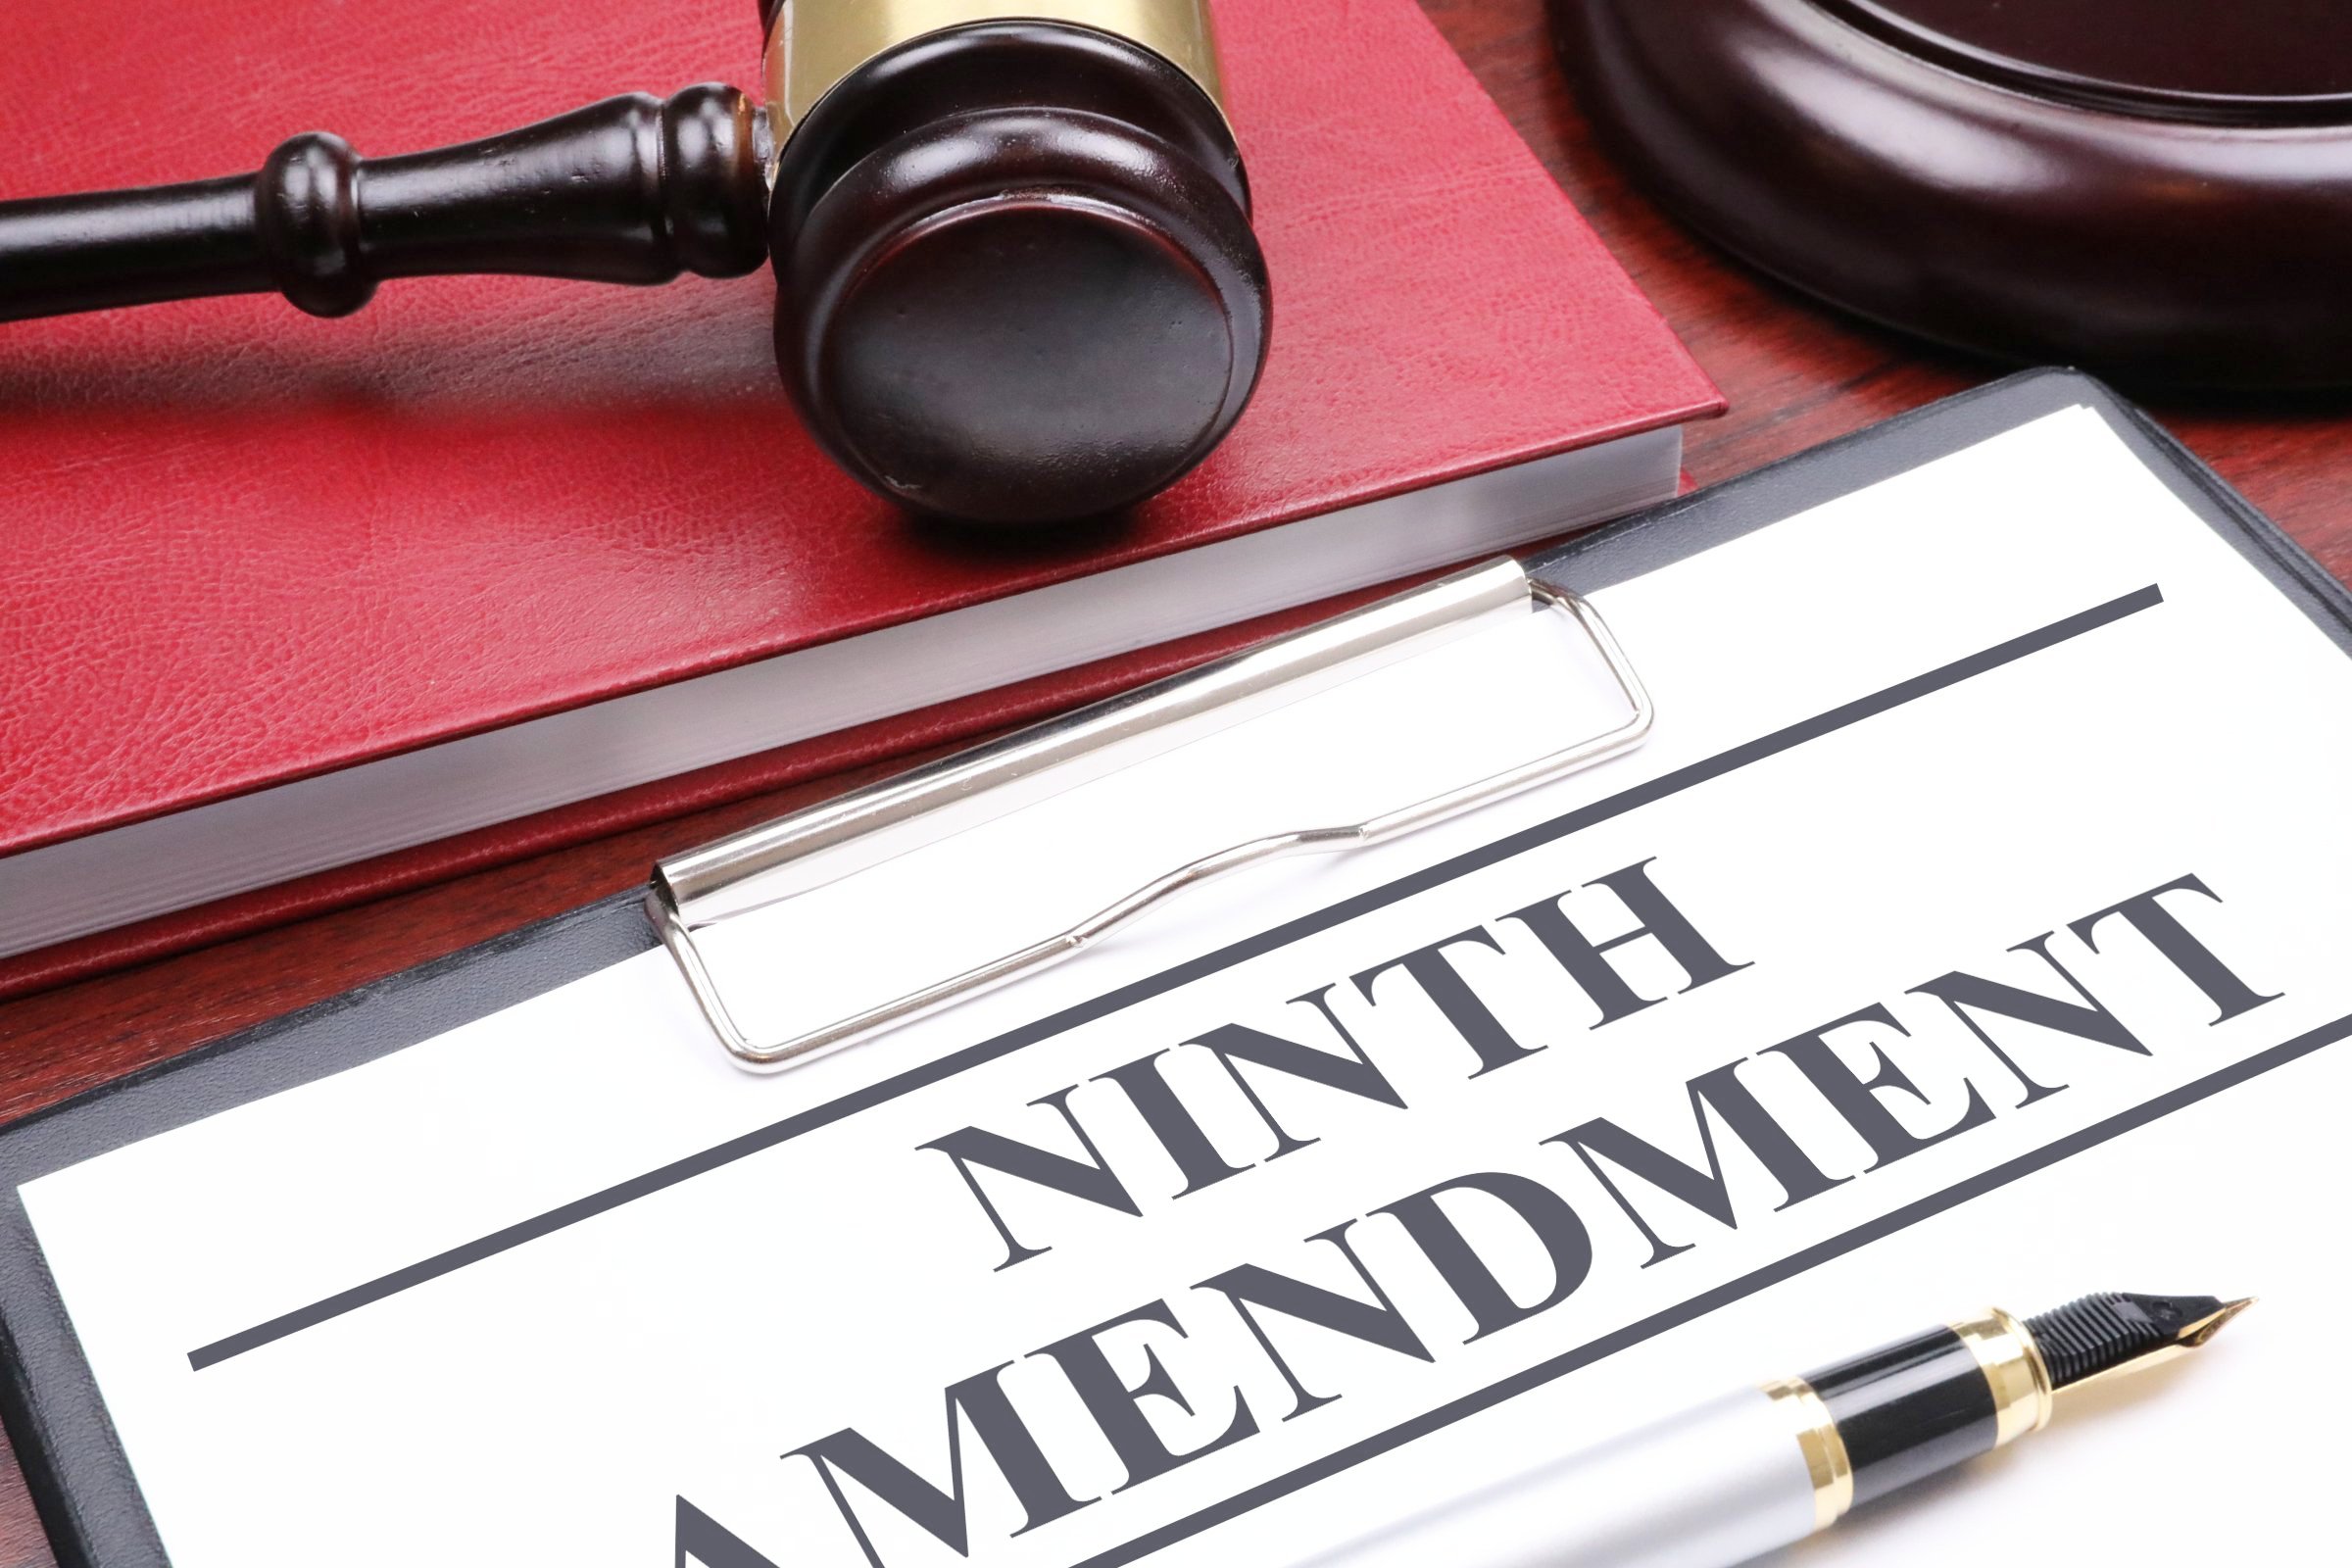 Ninth Amendment Free Of Charge Creative Commons Legal 6 Image